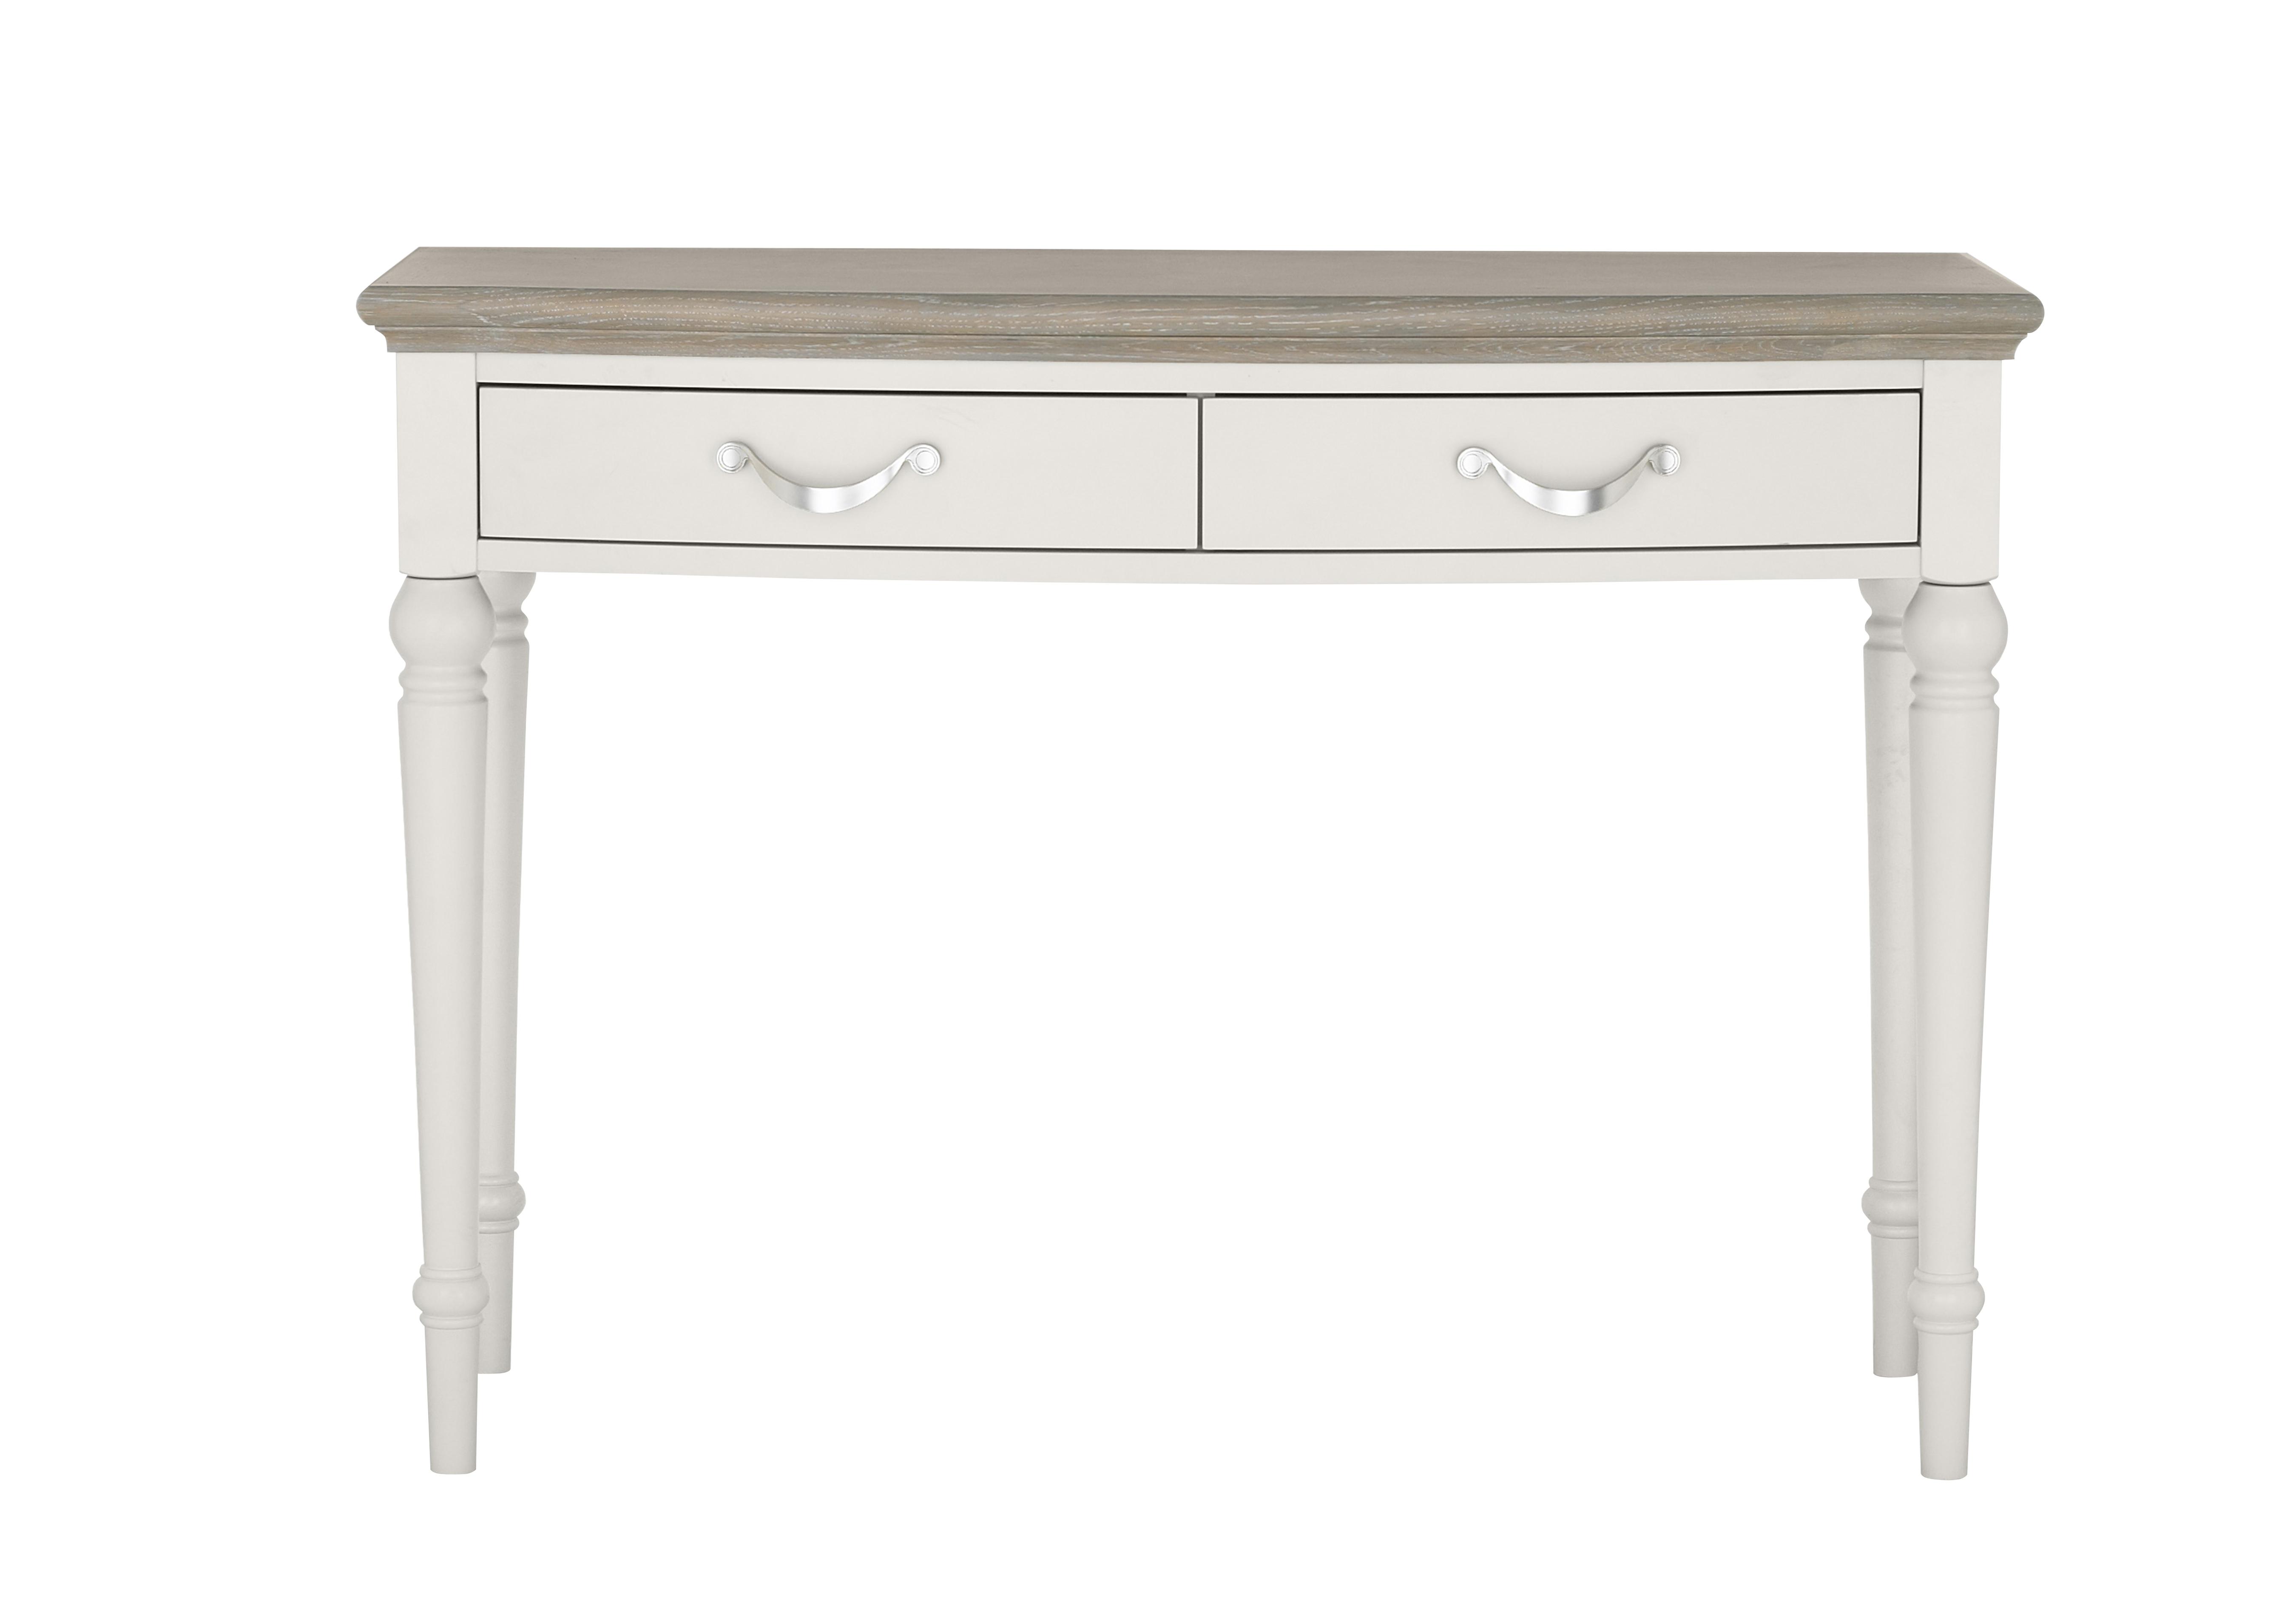 Annecy Dressing Table in Soft Grey And Grey Washed Oak on Furniture Village